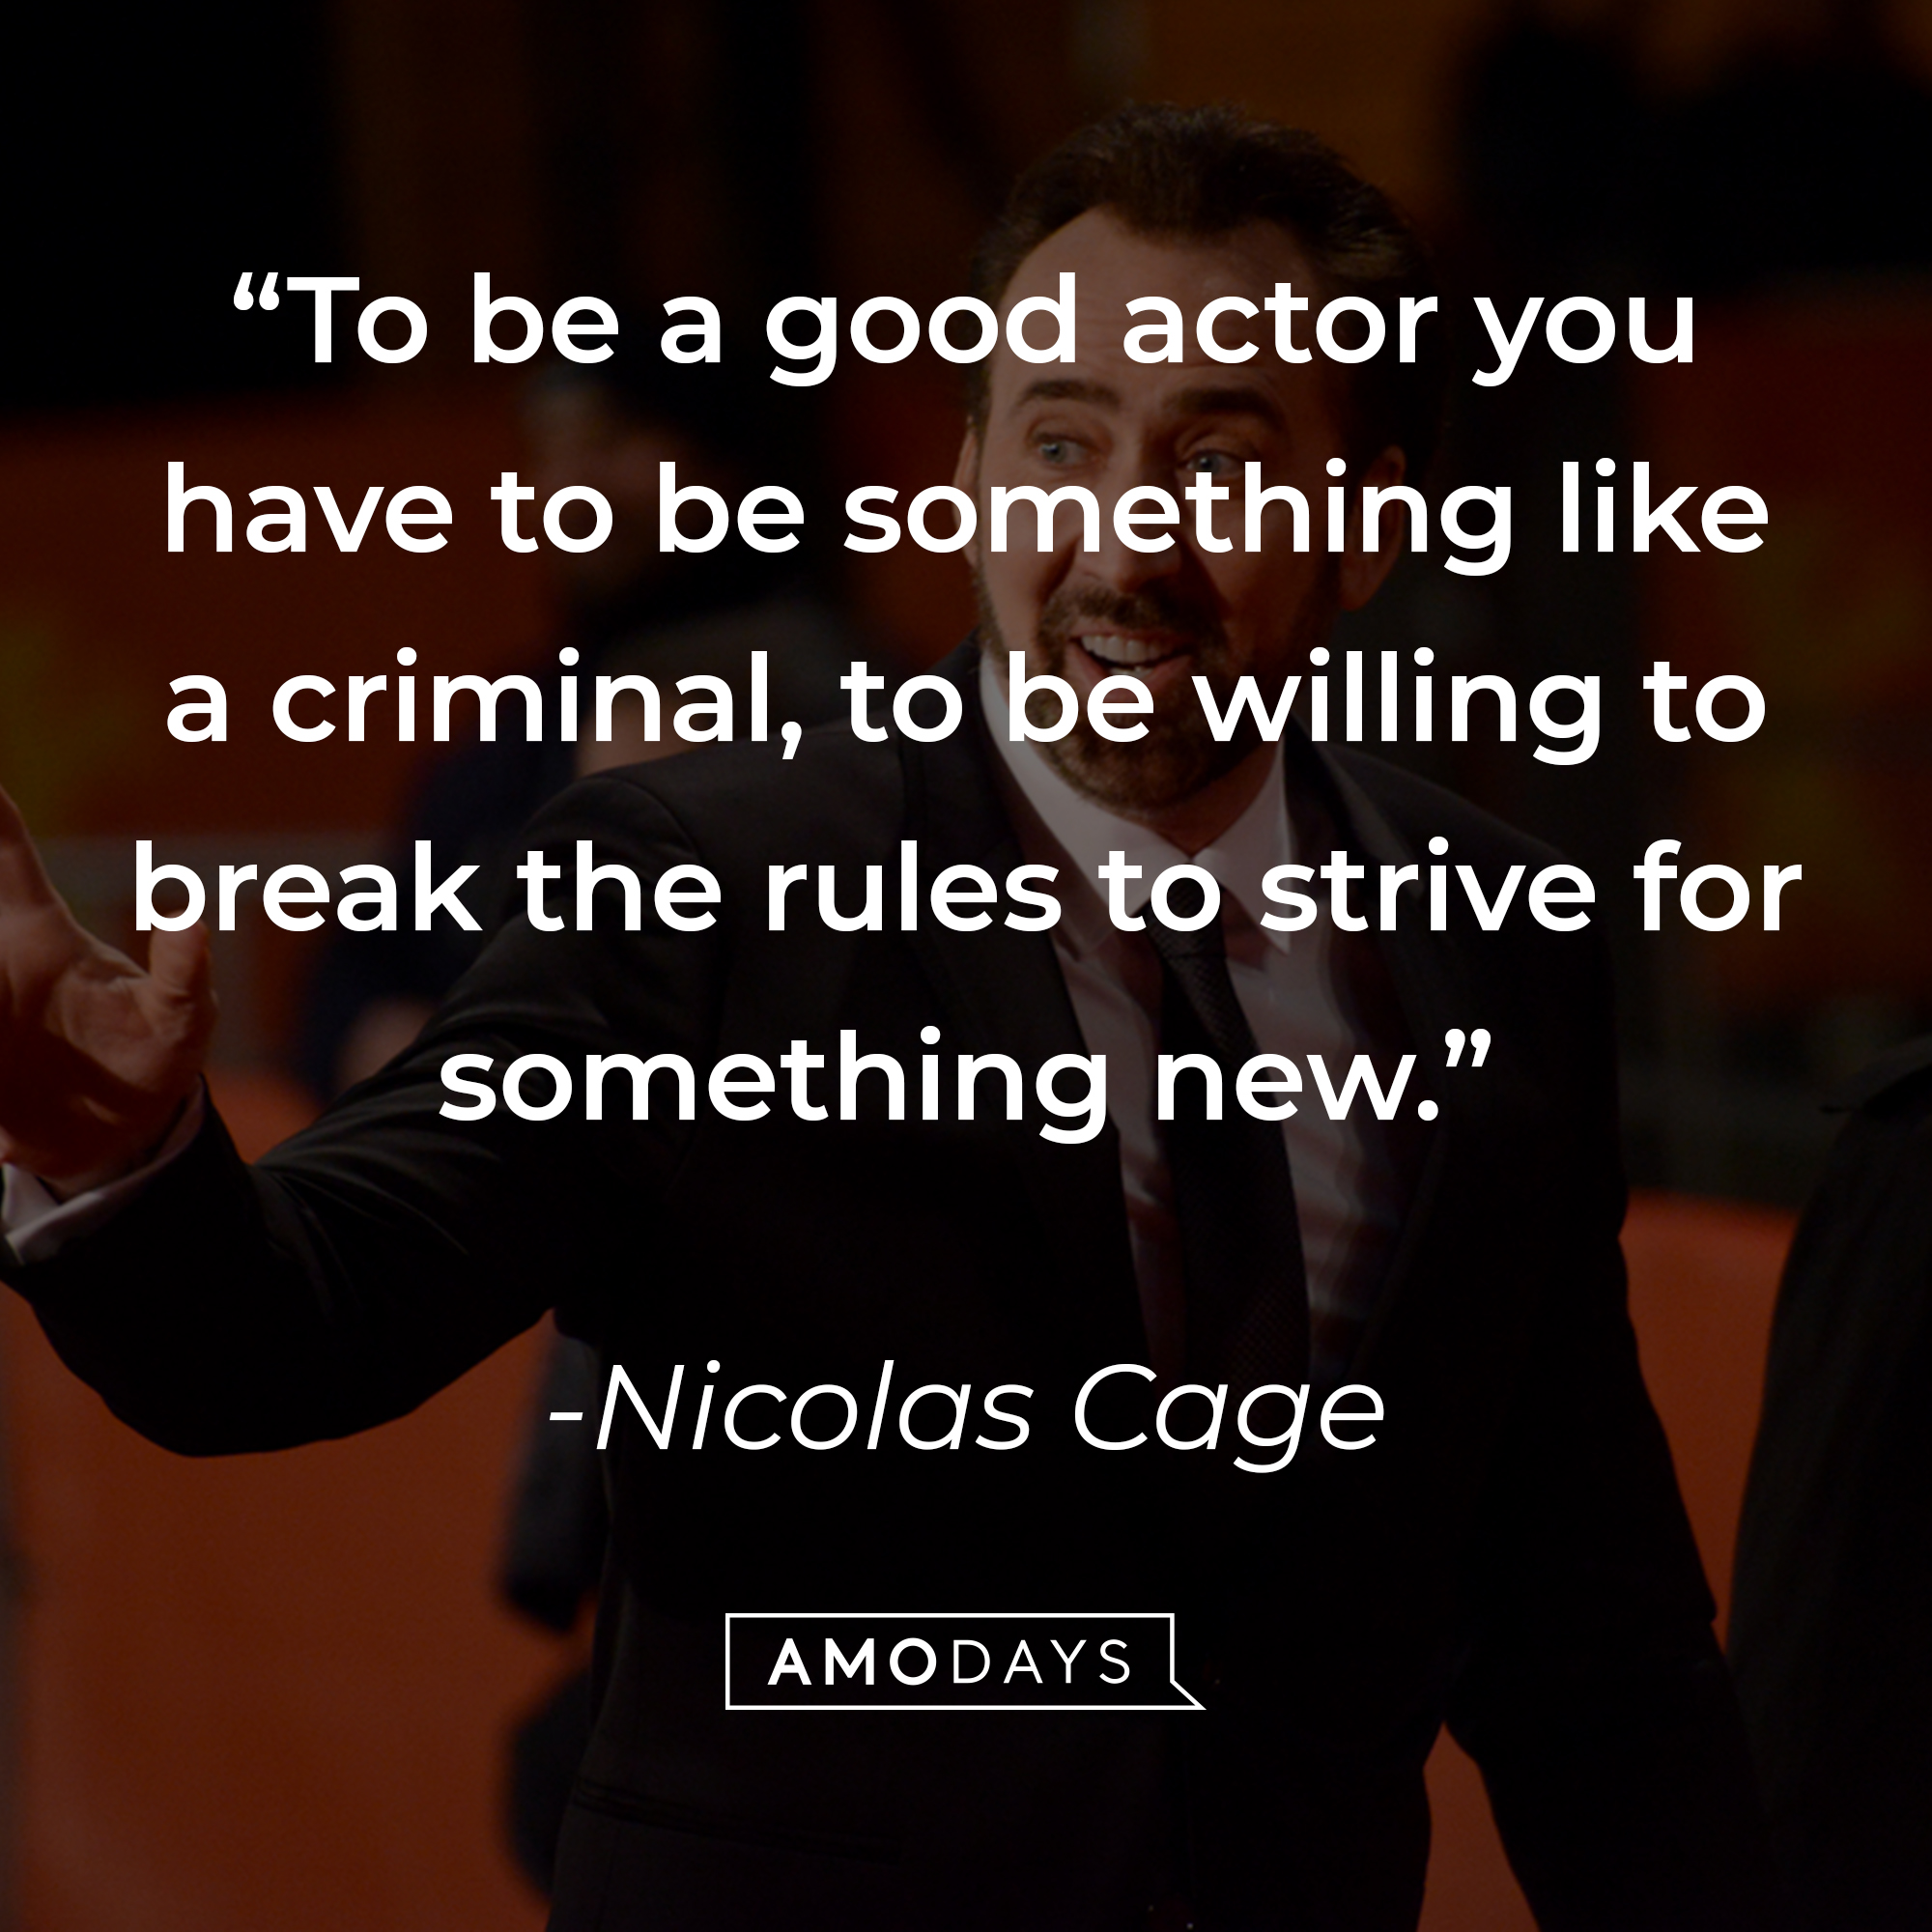 Nicolas Cage's quote: "To be a good actor you have to be something like a criminal, to be willing to break the rules to strive for something new." | Source: Getty Images